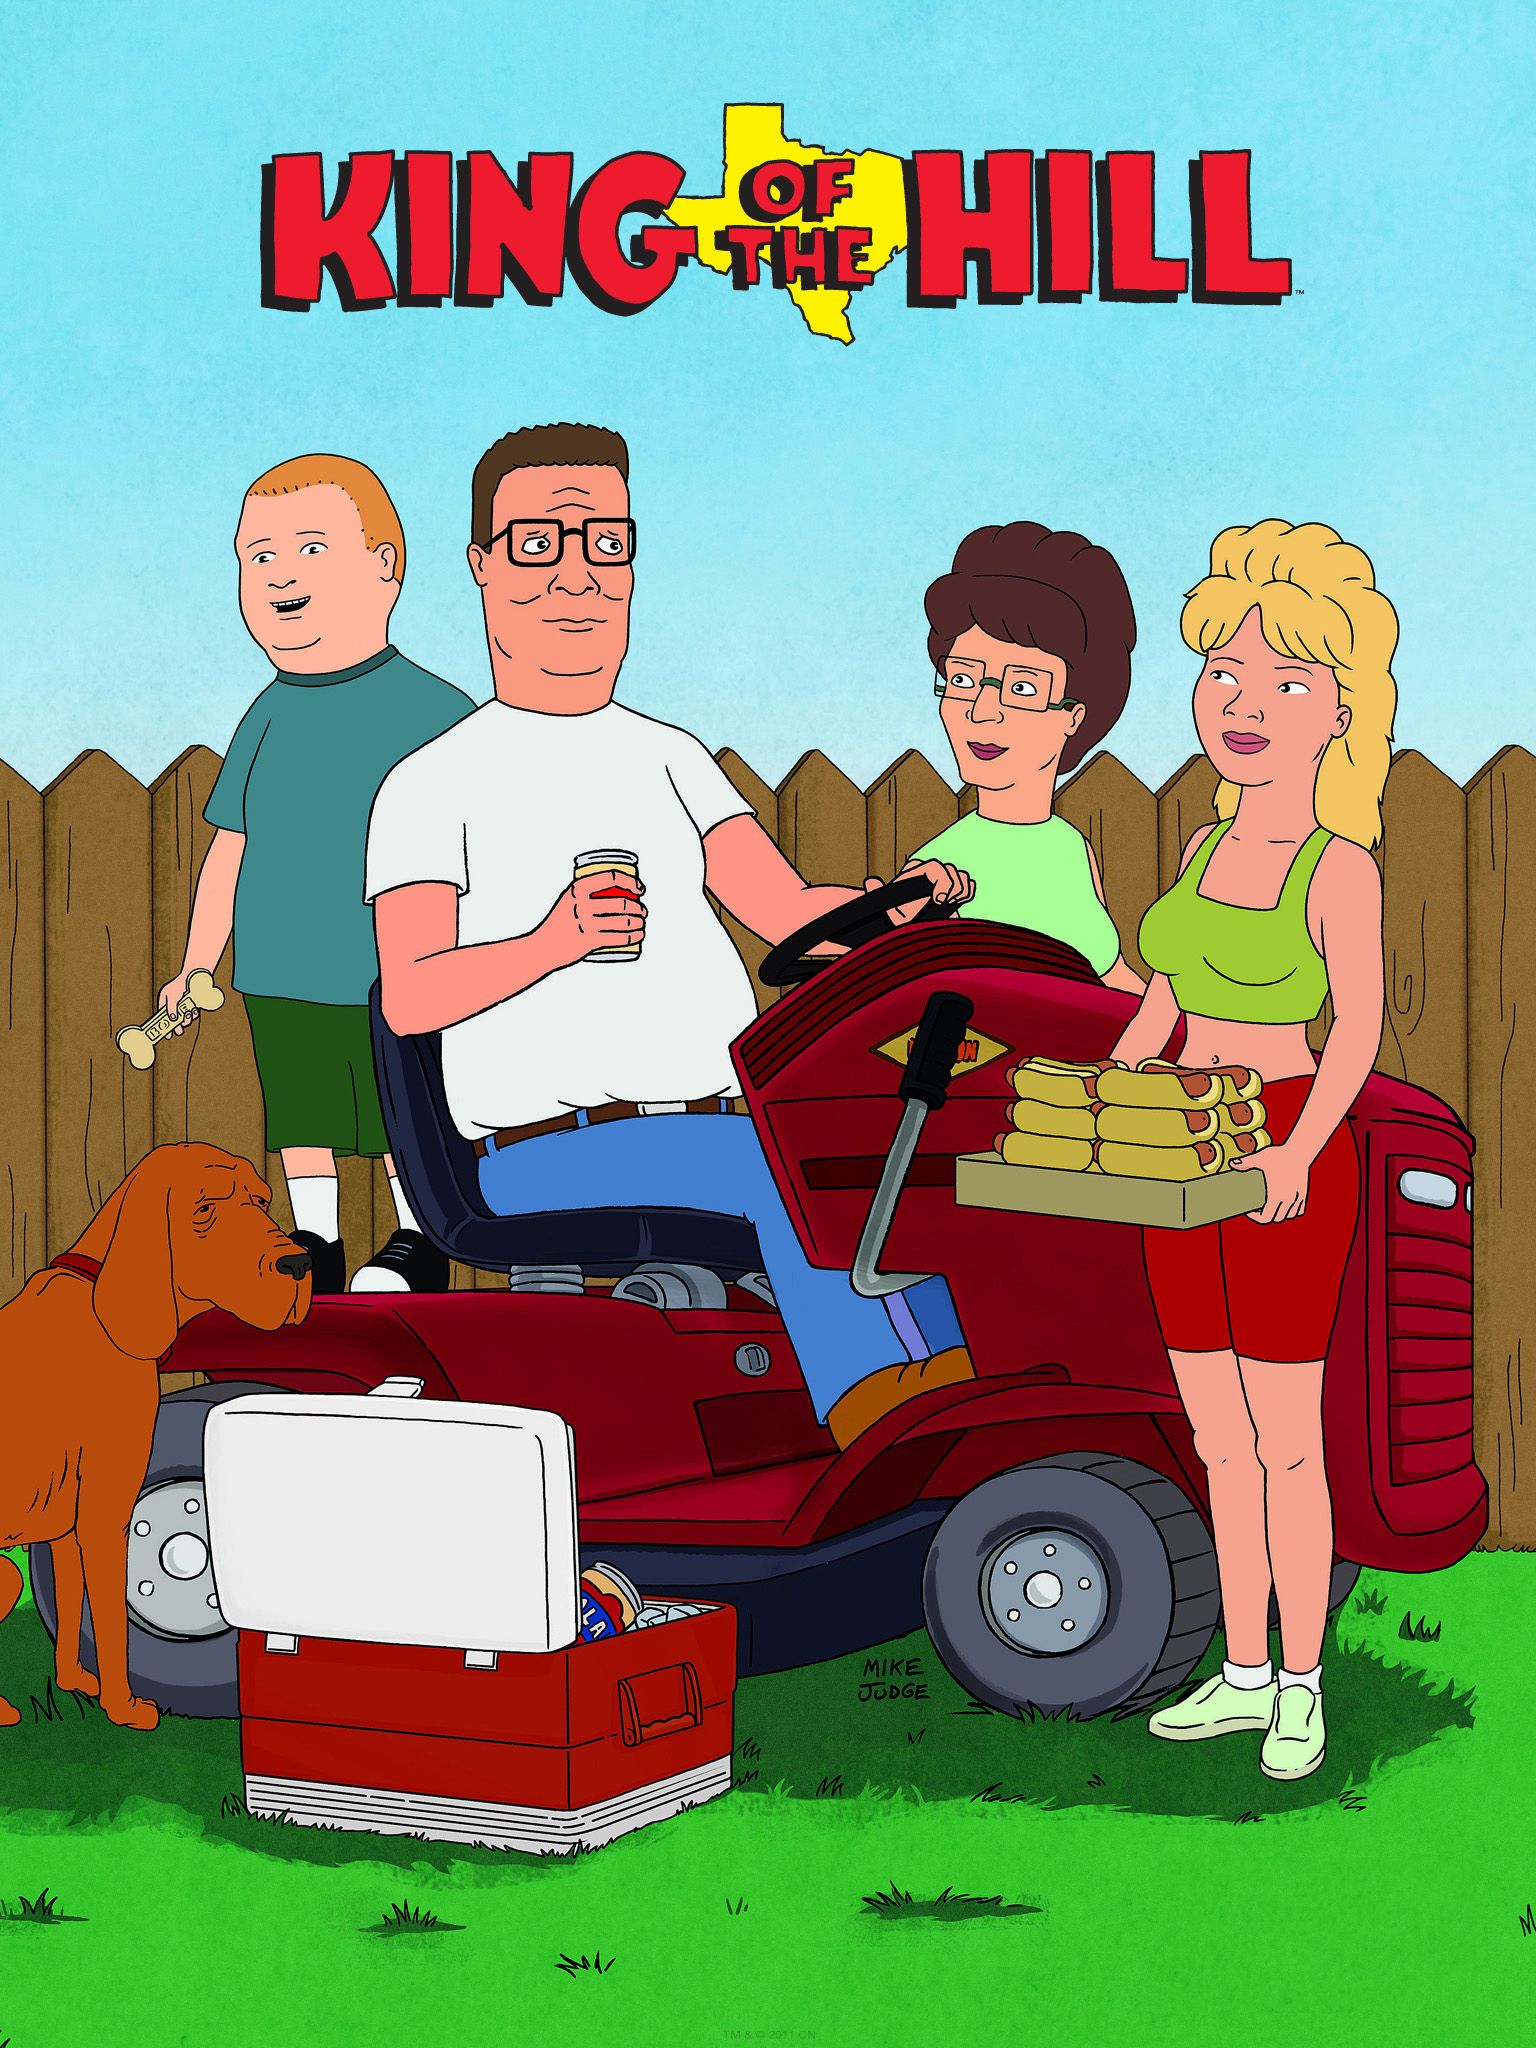 King of the Hill (1993 film) - Wikipedia